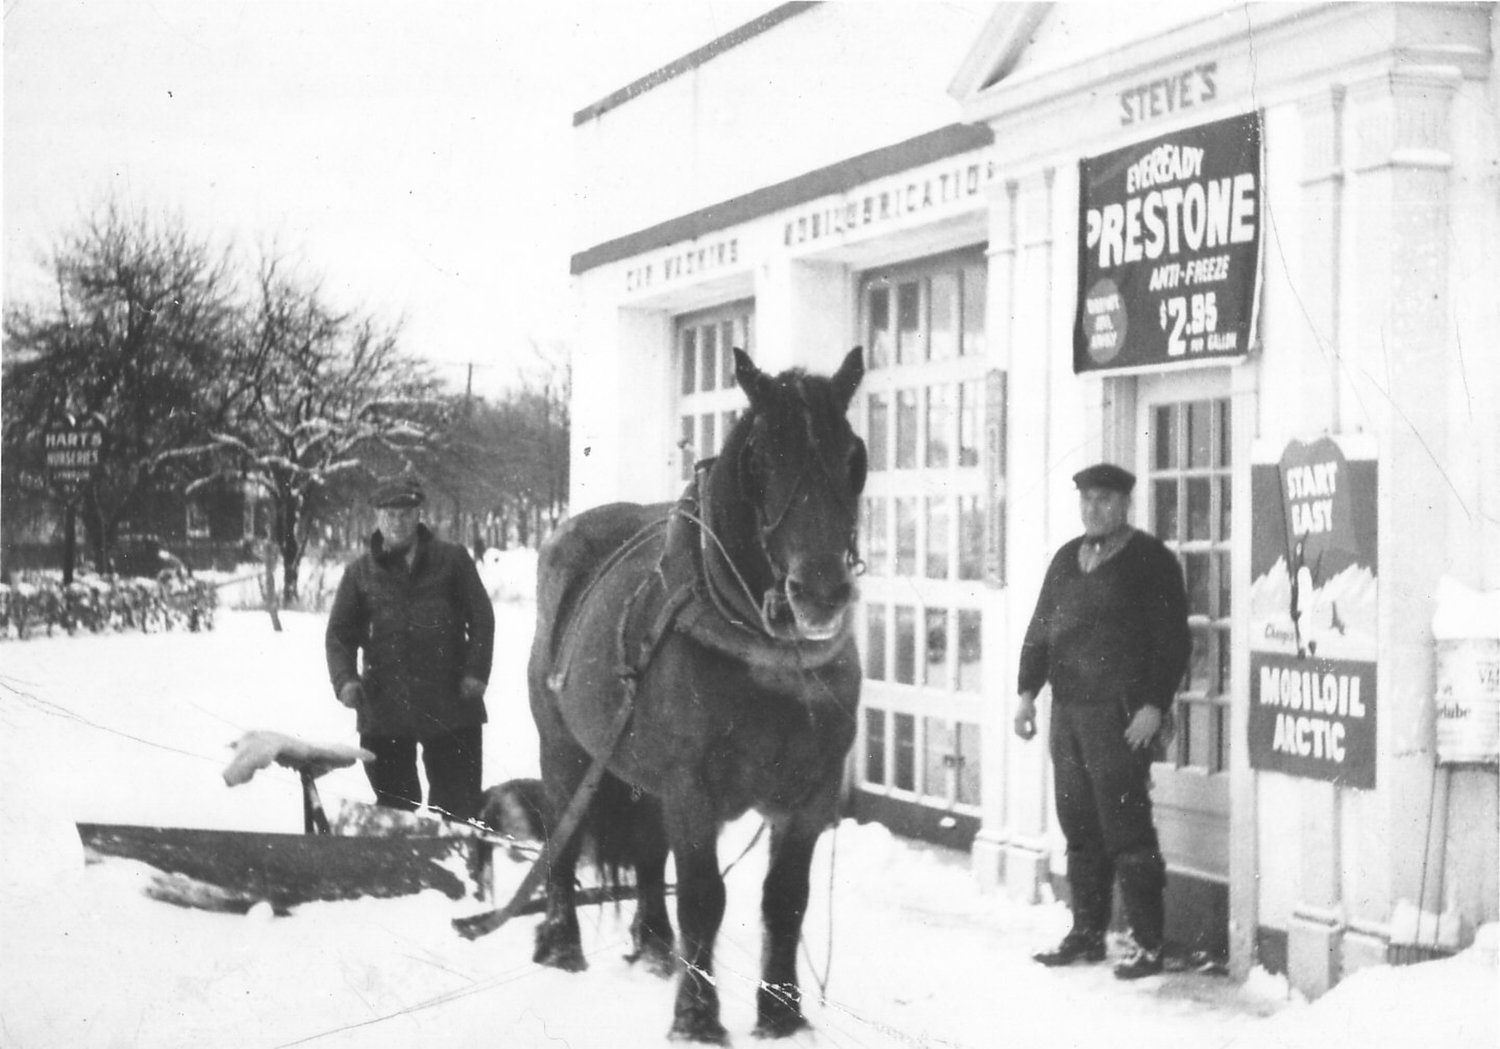 Plowing snow with a one horse-power engine, in 1934. This is Steve’s Garage, at the corner of Hempstead and Lakeview avenues.